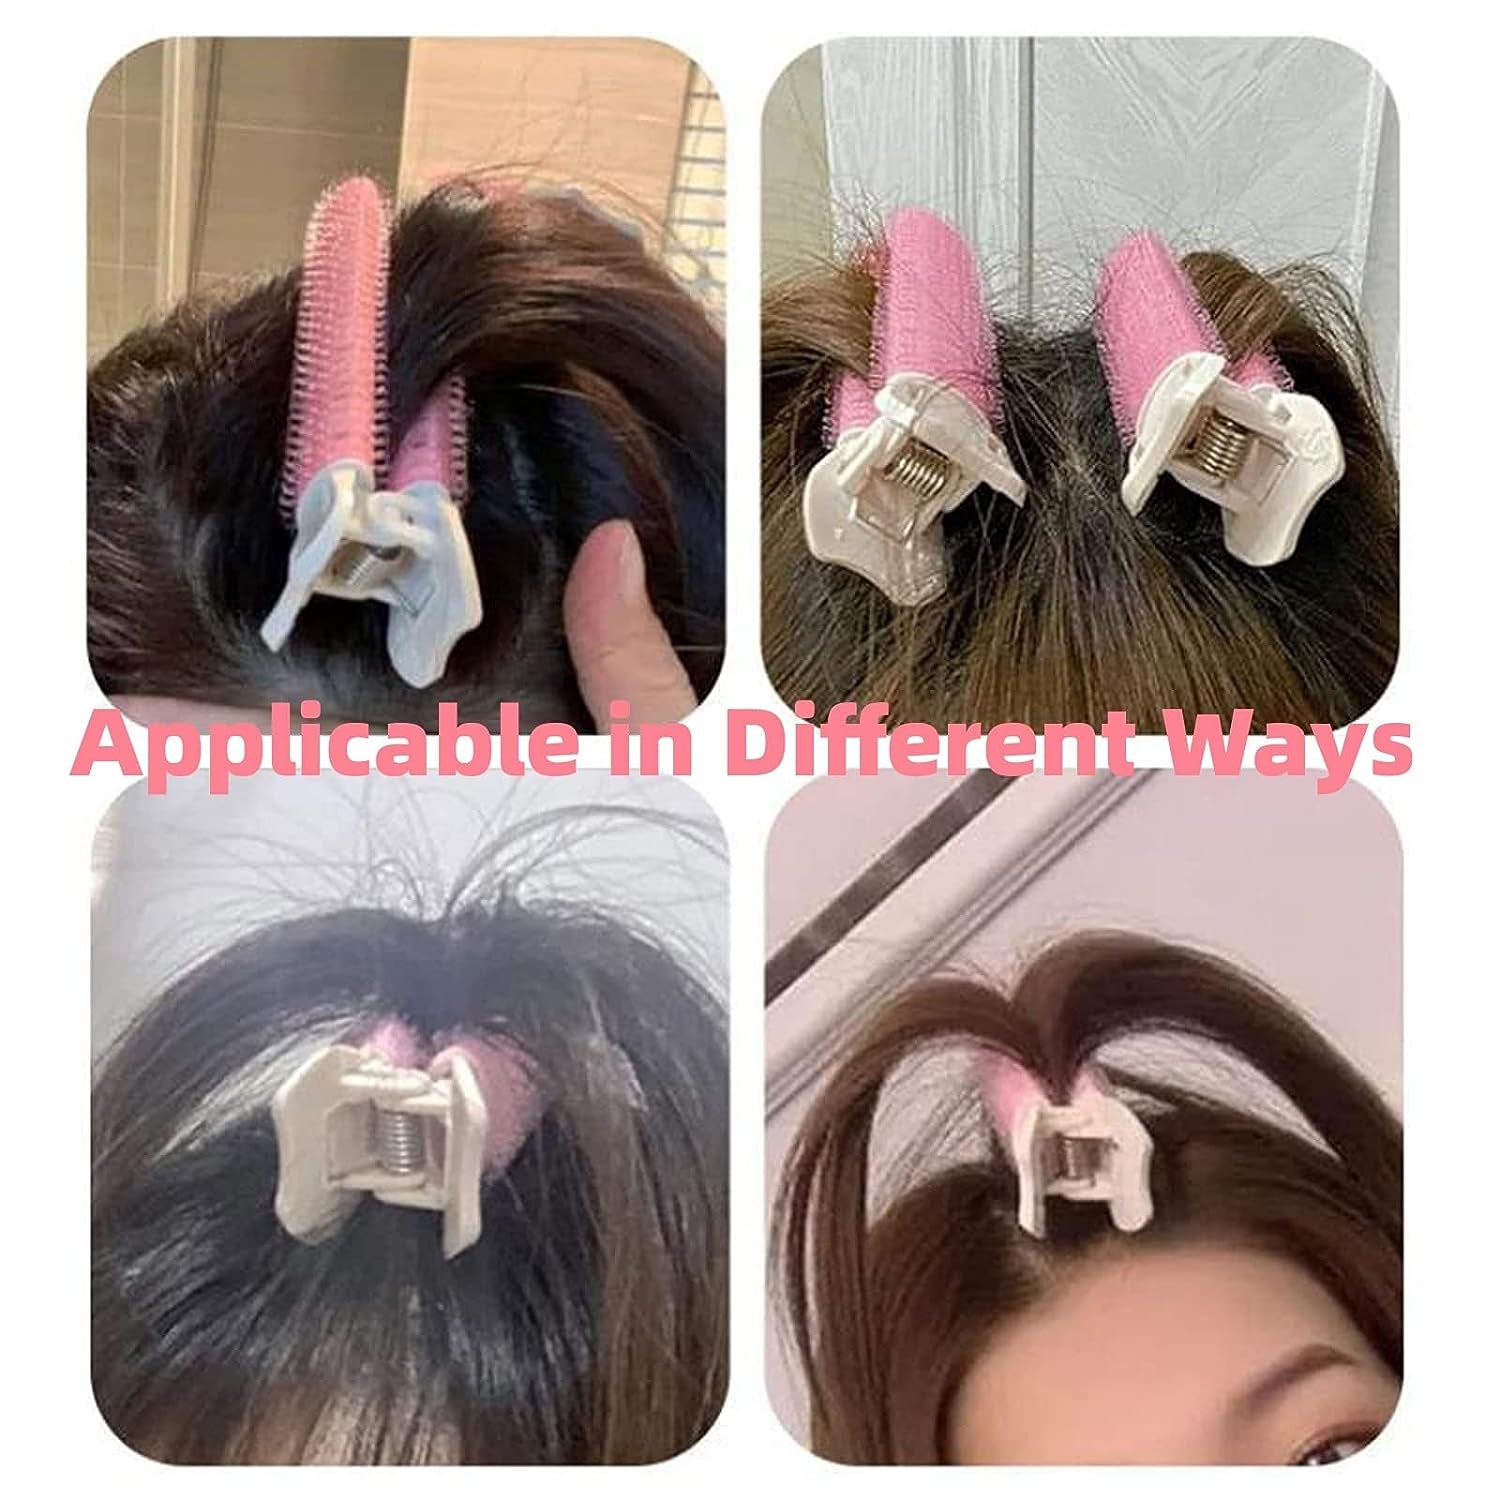 Volumizing Hair Clips, 10PCS Velcro Clips for Hair, Root Clips for Hair Volume, Fluffy Hair Volumizer Clips, Instant Hair Volumizing Clips for Women. (Black, Pink, Blue, Purple,Red)